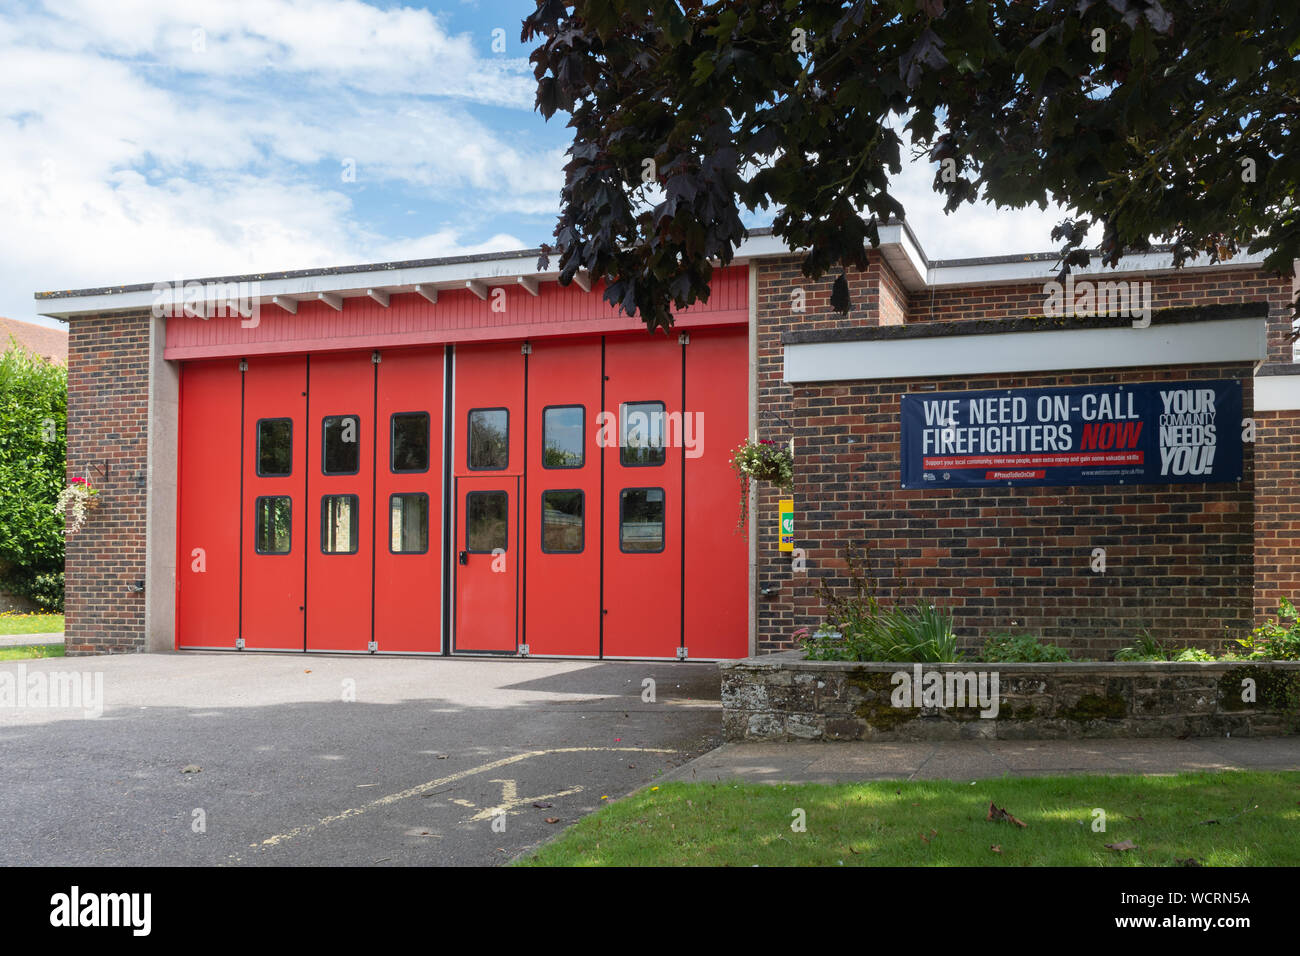 Fire station with recruitment sign or banner for on-call firefighters, your community needs you, Petworth, West Sussex, UK Stock Photo